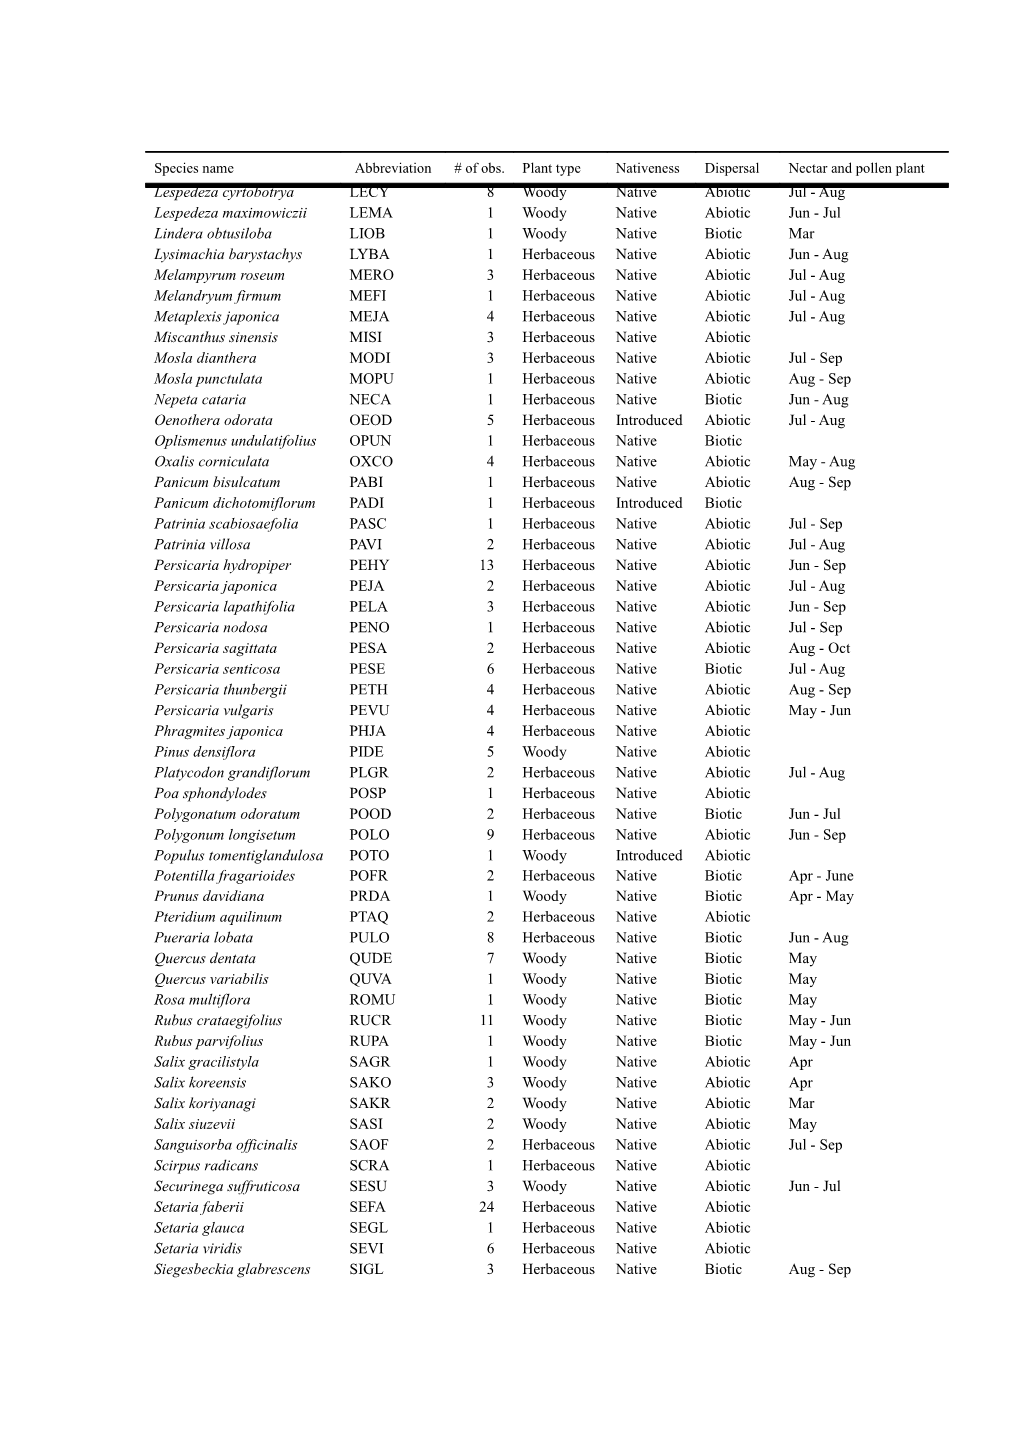 Table S. List of Plant Species Included in Analyses. Only Species Occurring in Greater